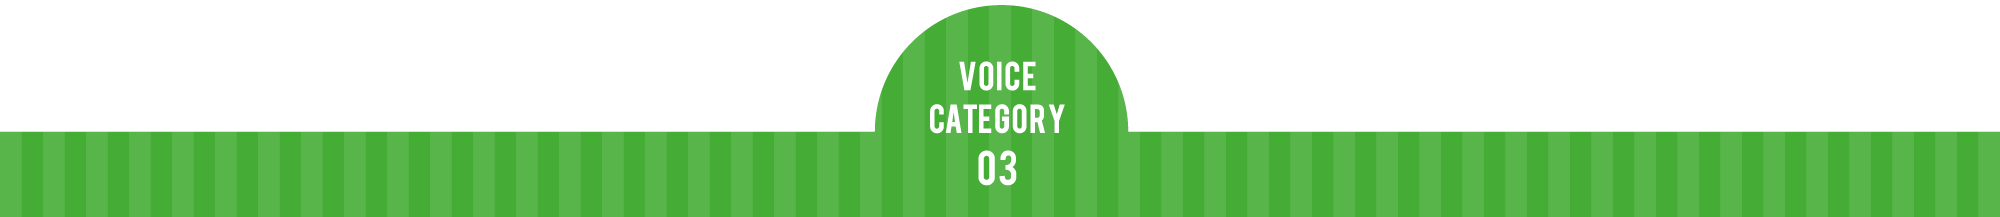 VOICE CATEGORY 02